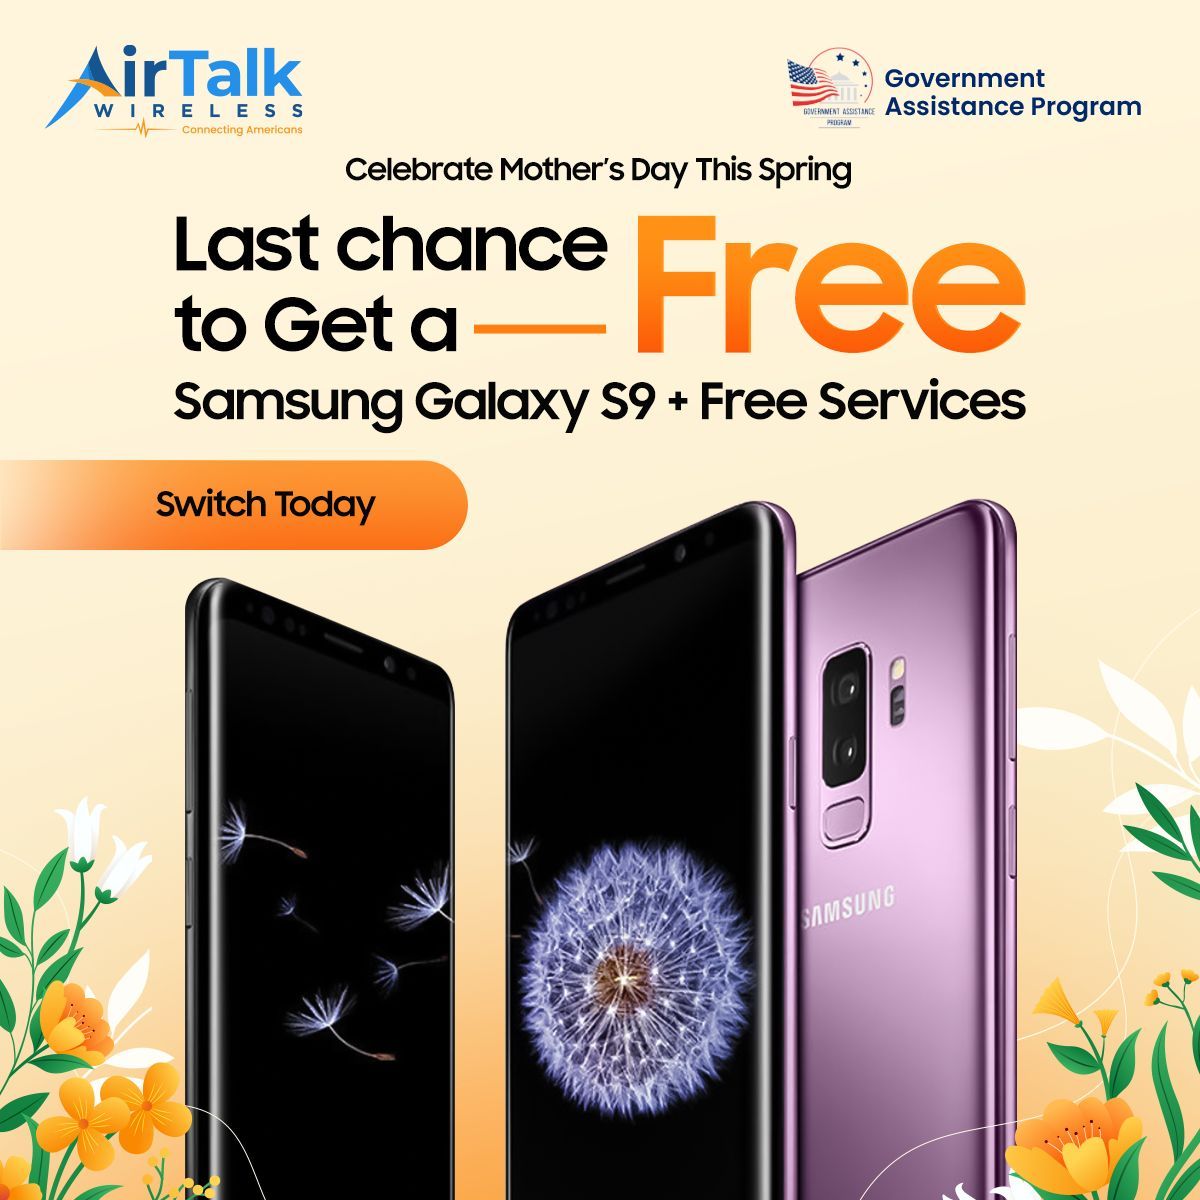 🌸 Get ready for Mother's Day with AirTalk Wireless! 🌸 

Switch today to access FREE services and keep your connections strong. 
Don't miss out on this special offer! 📱💐 
 
#MothersDay #SwitchToAirTalk #StayConnected